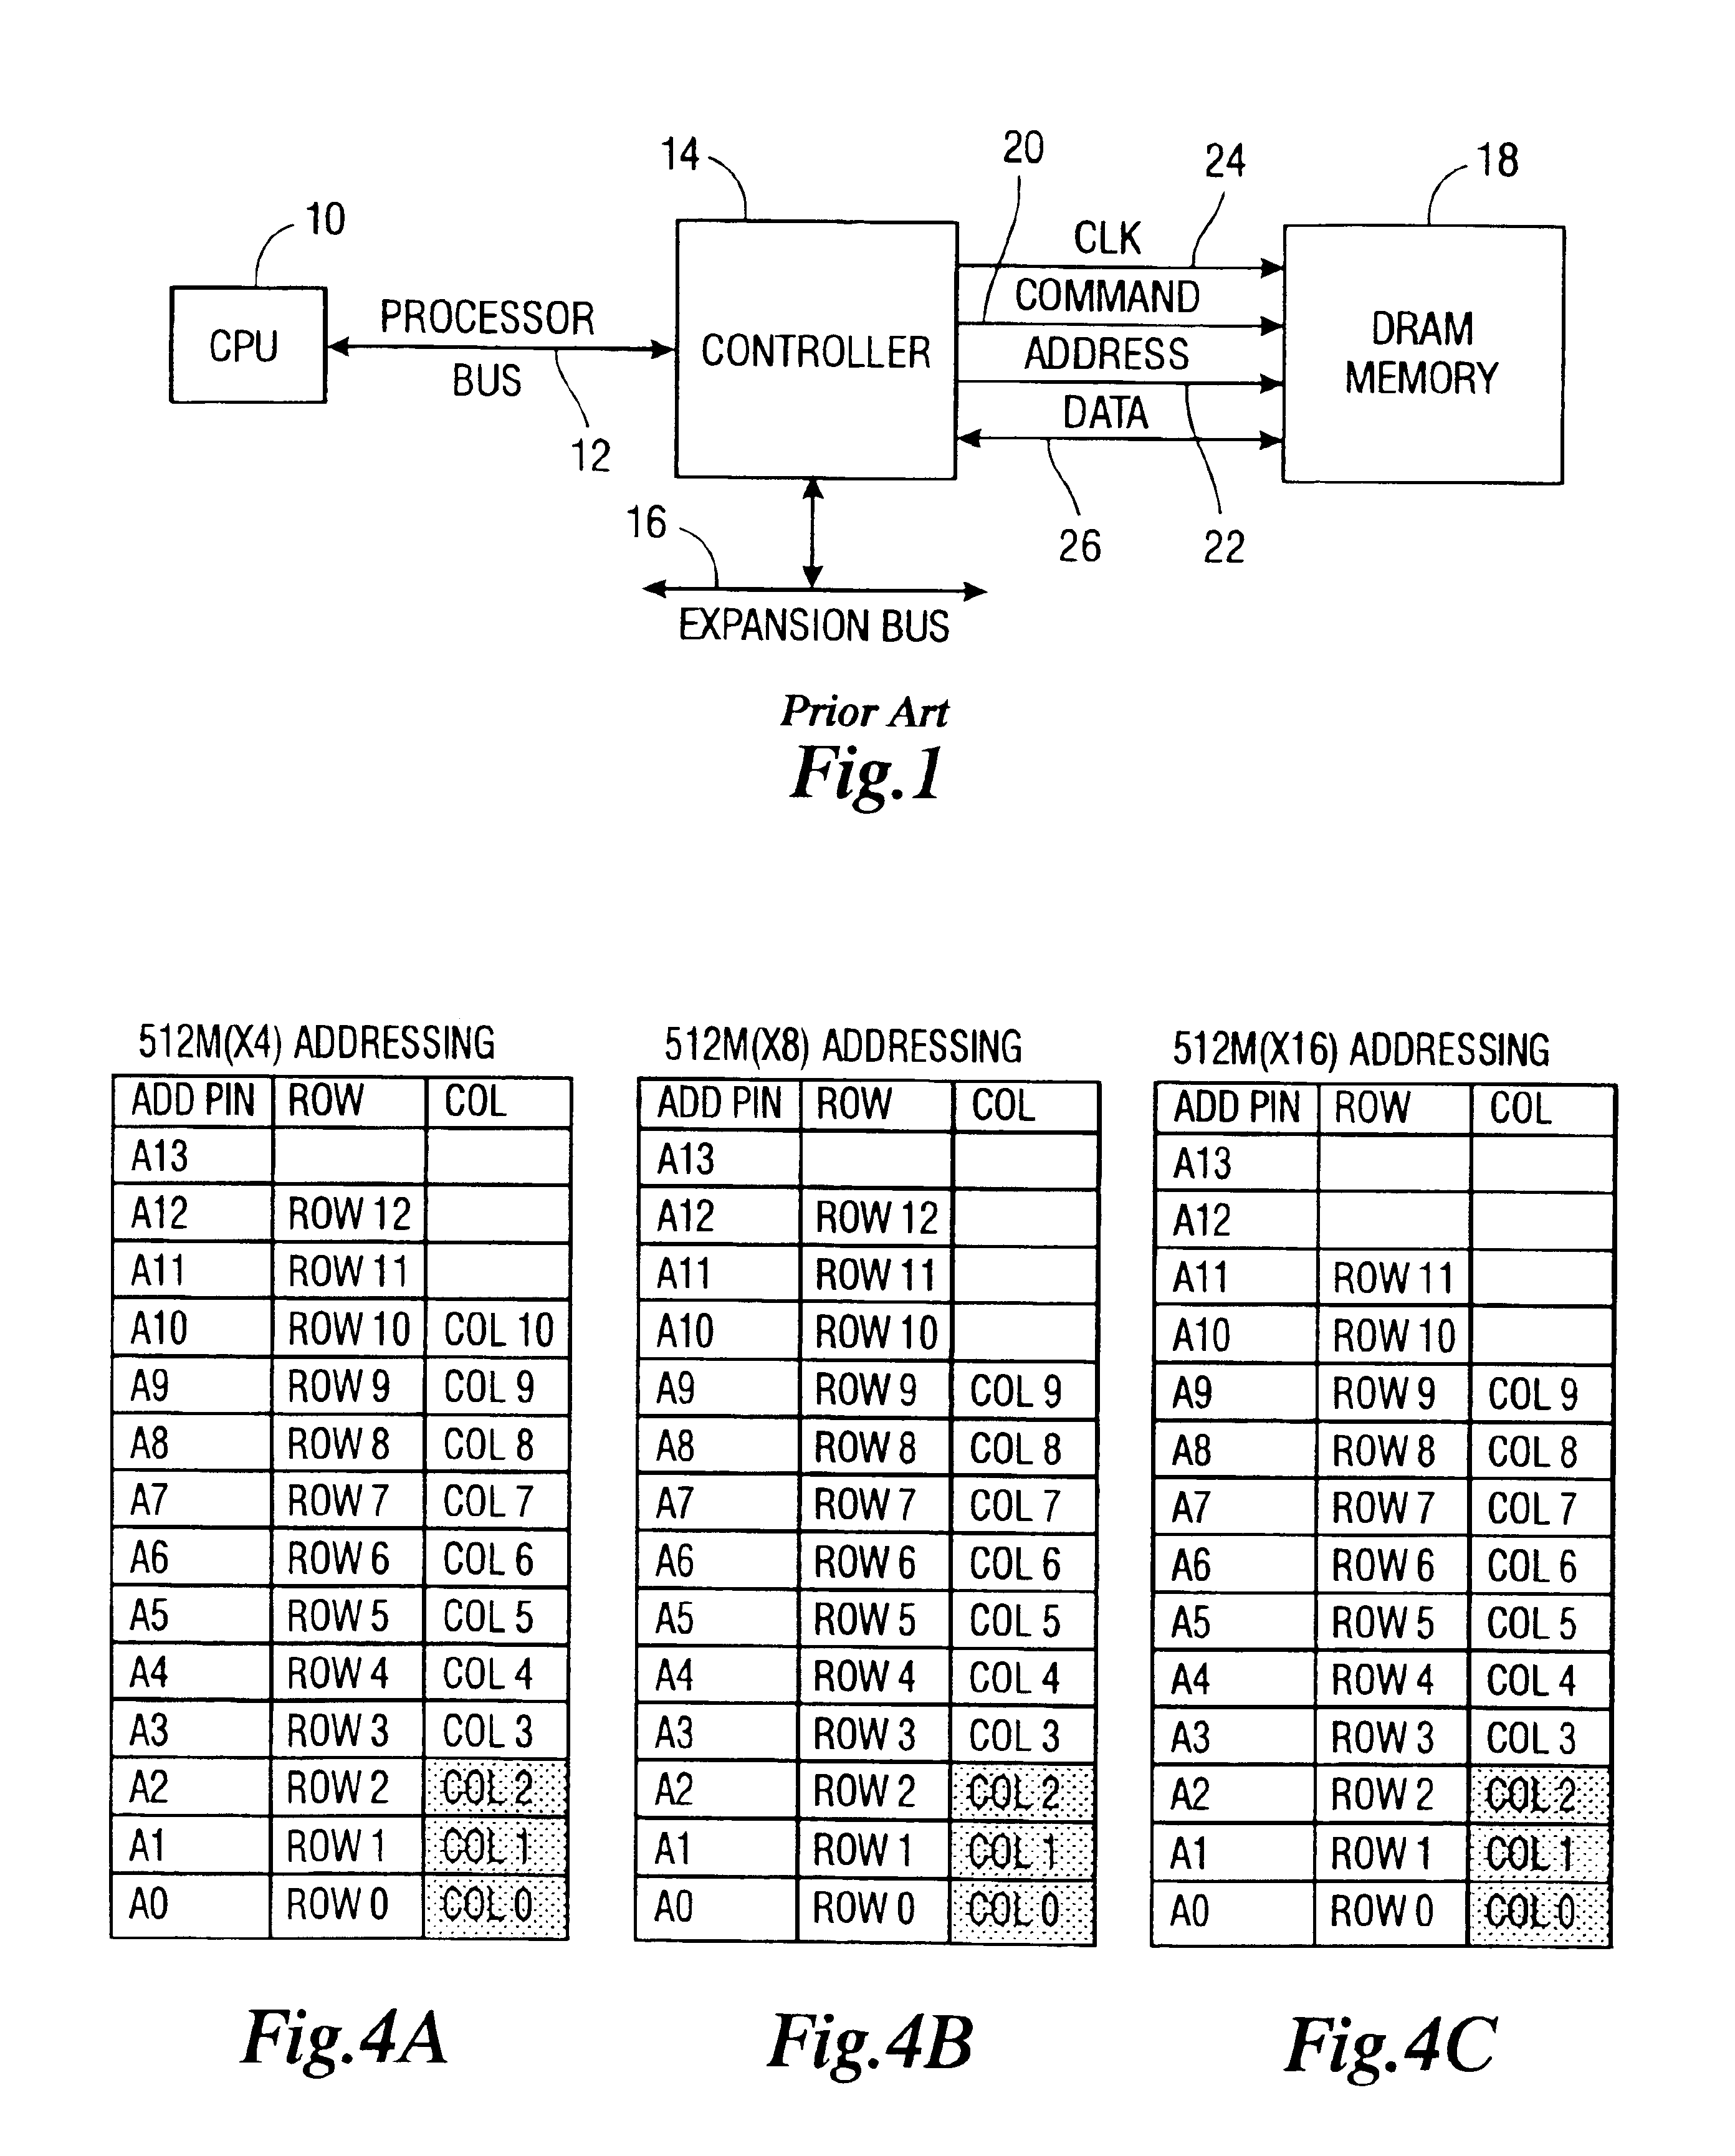 Memory device having different burst order addressing for read and write operations